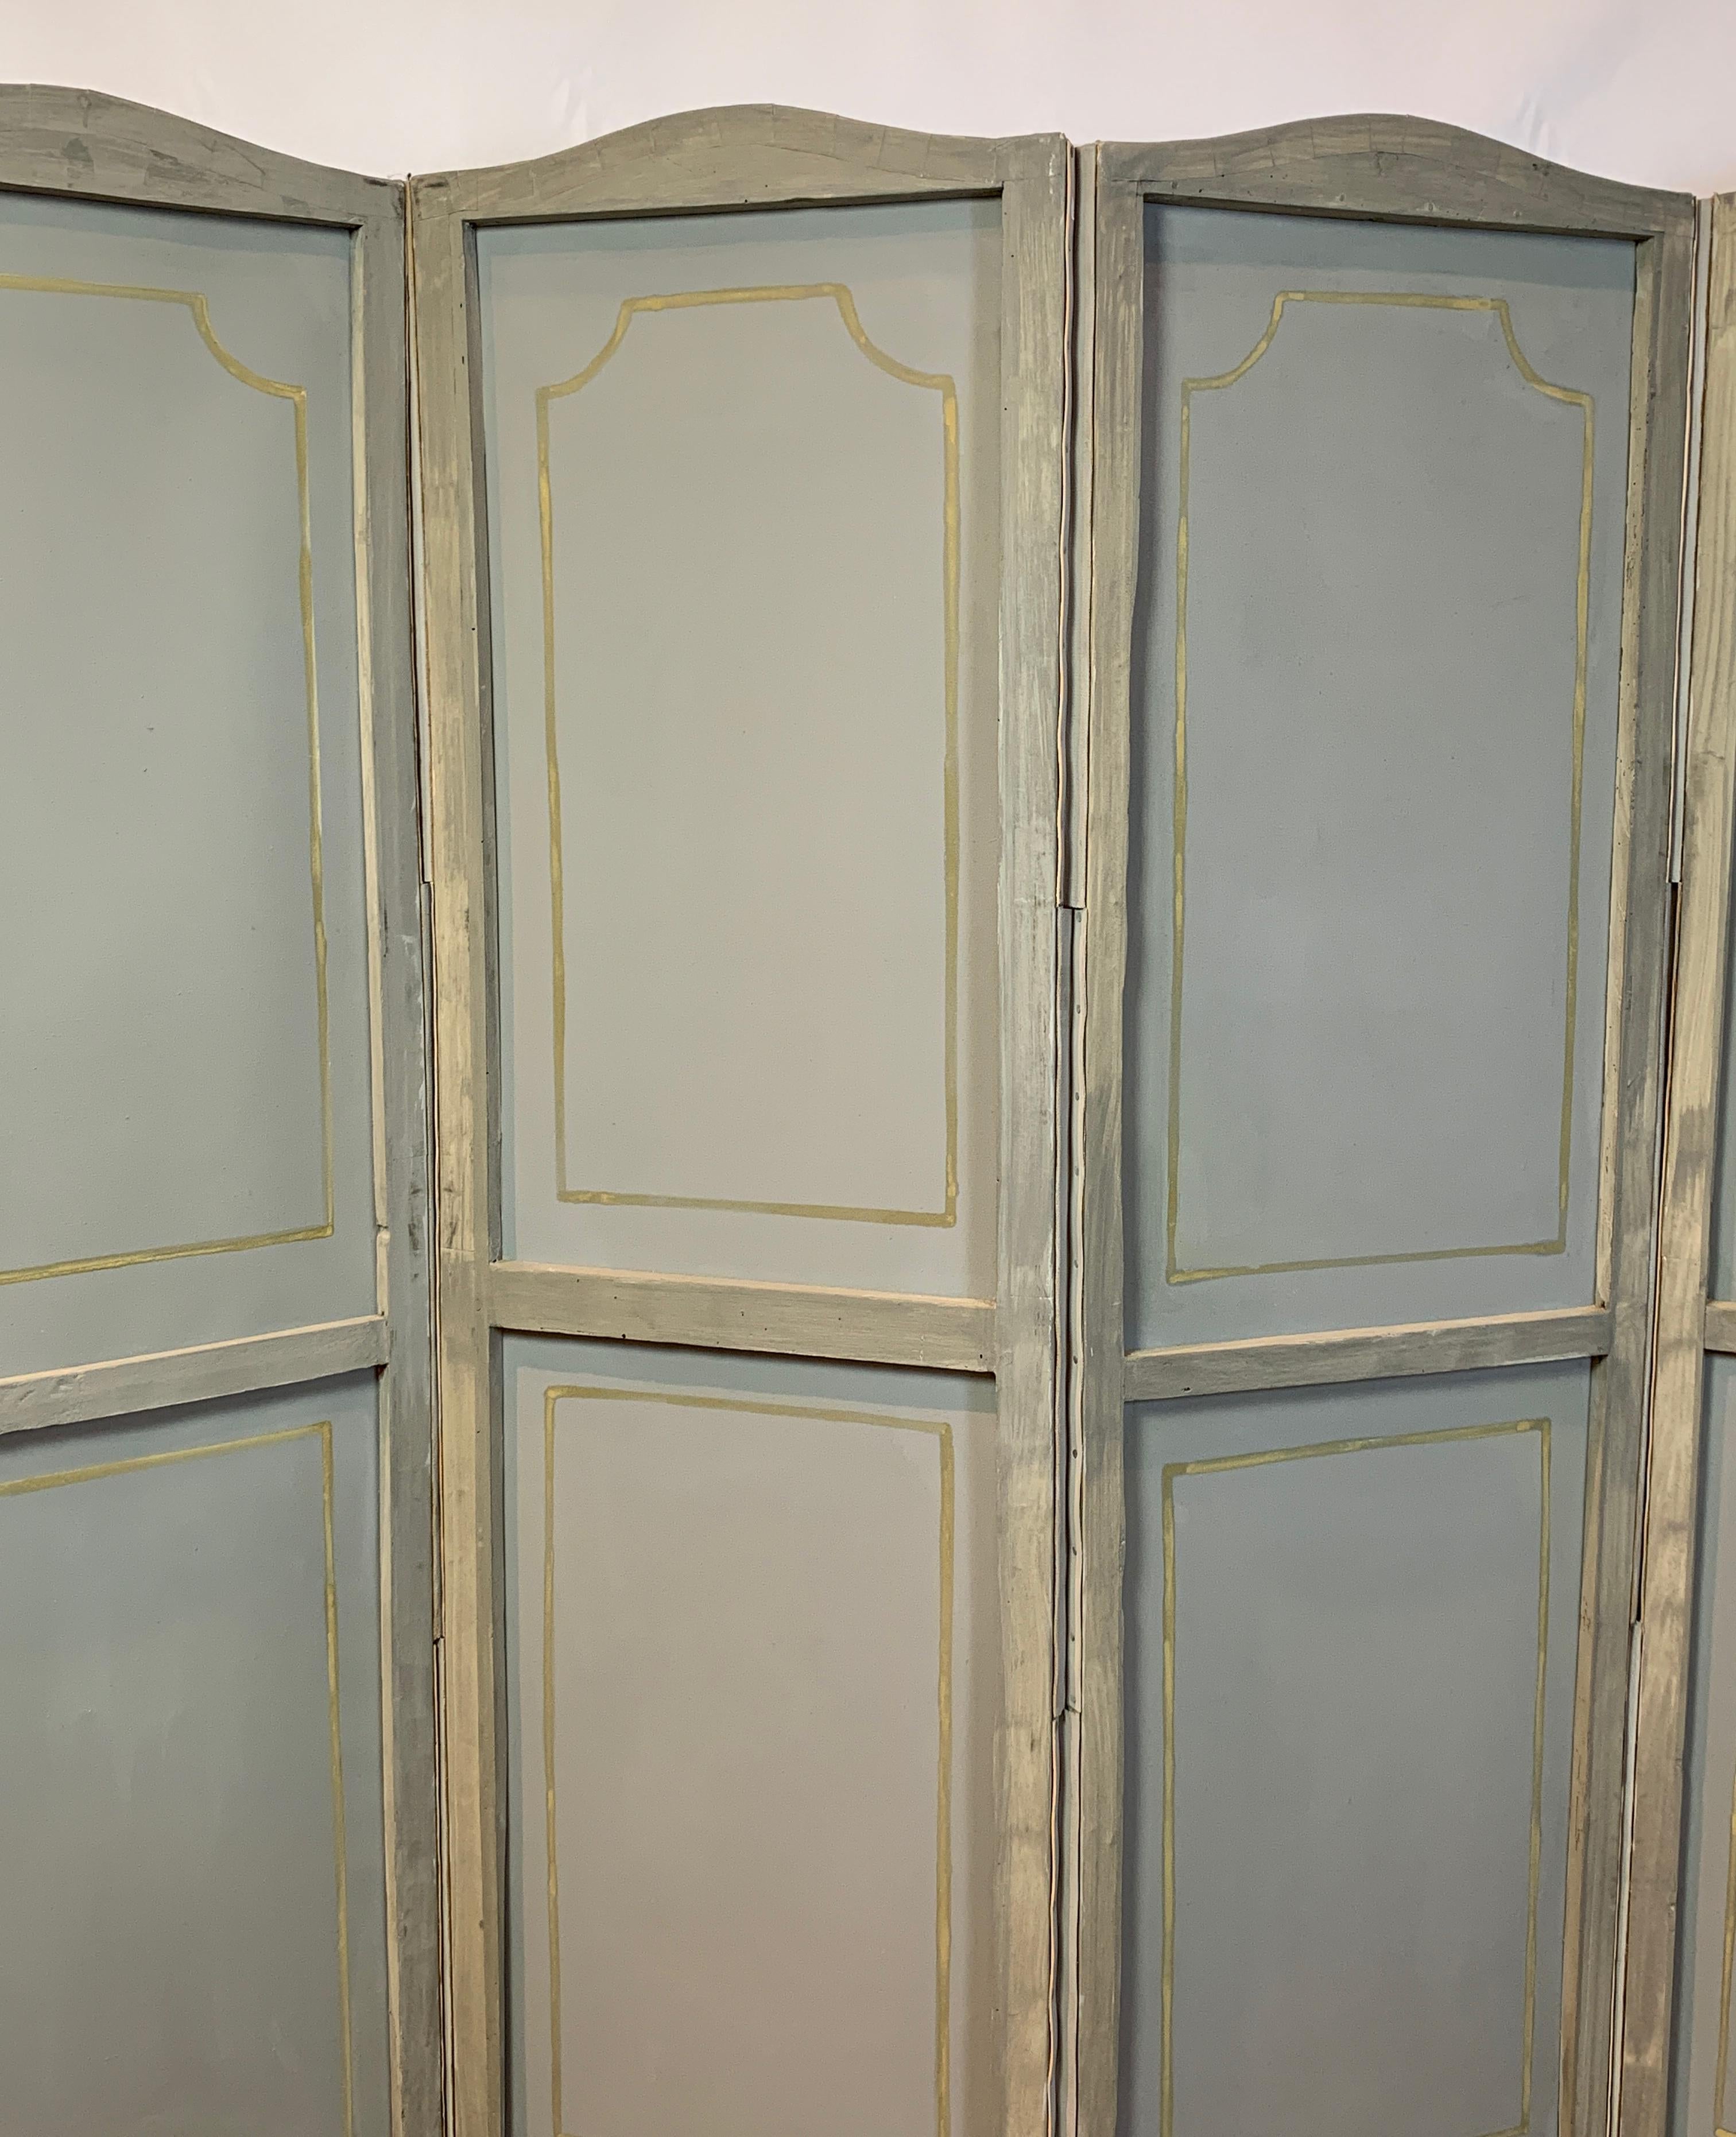 Hand Painted Four Panel Folding Screen in the Style of Gracie or de Gournay 6